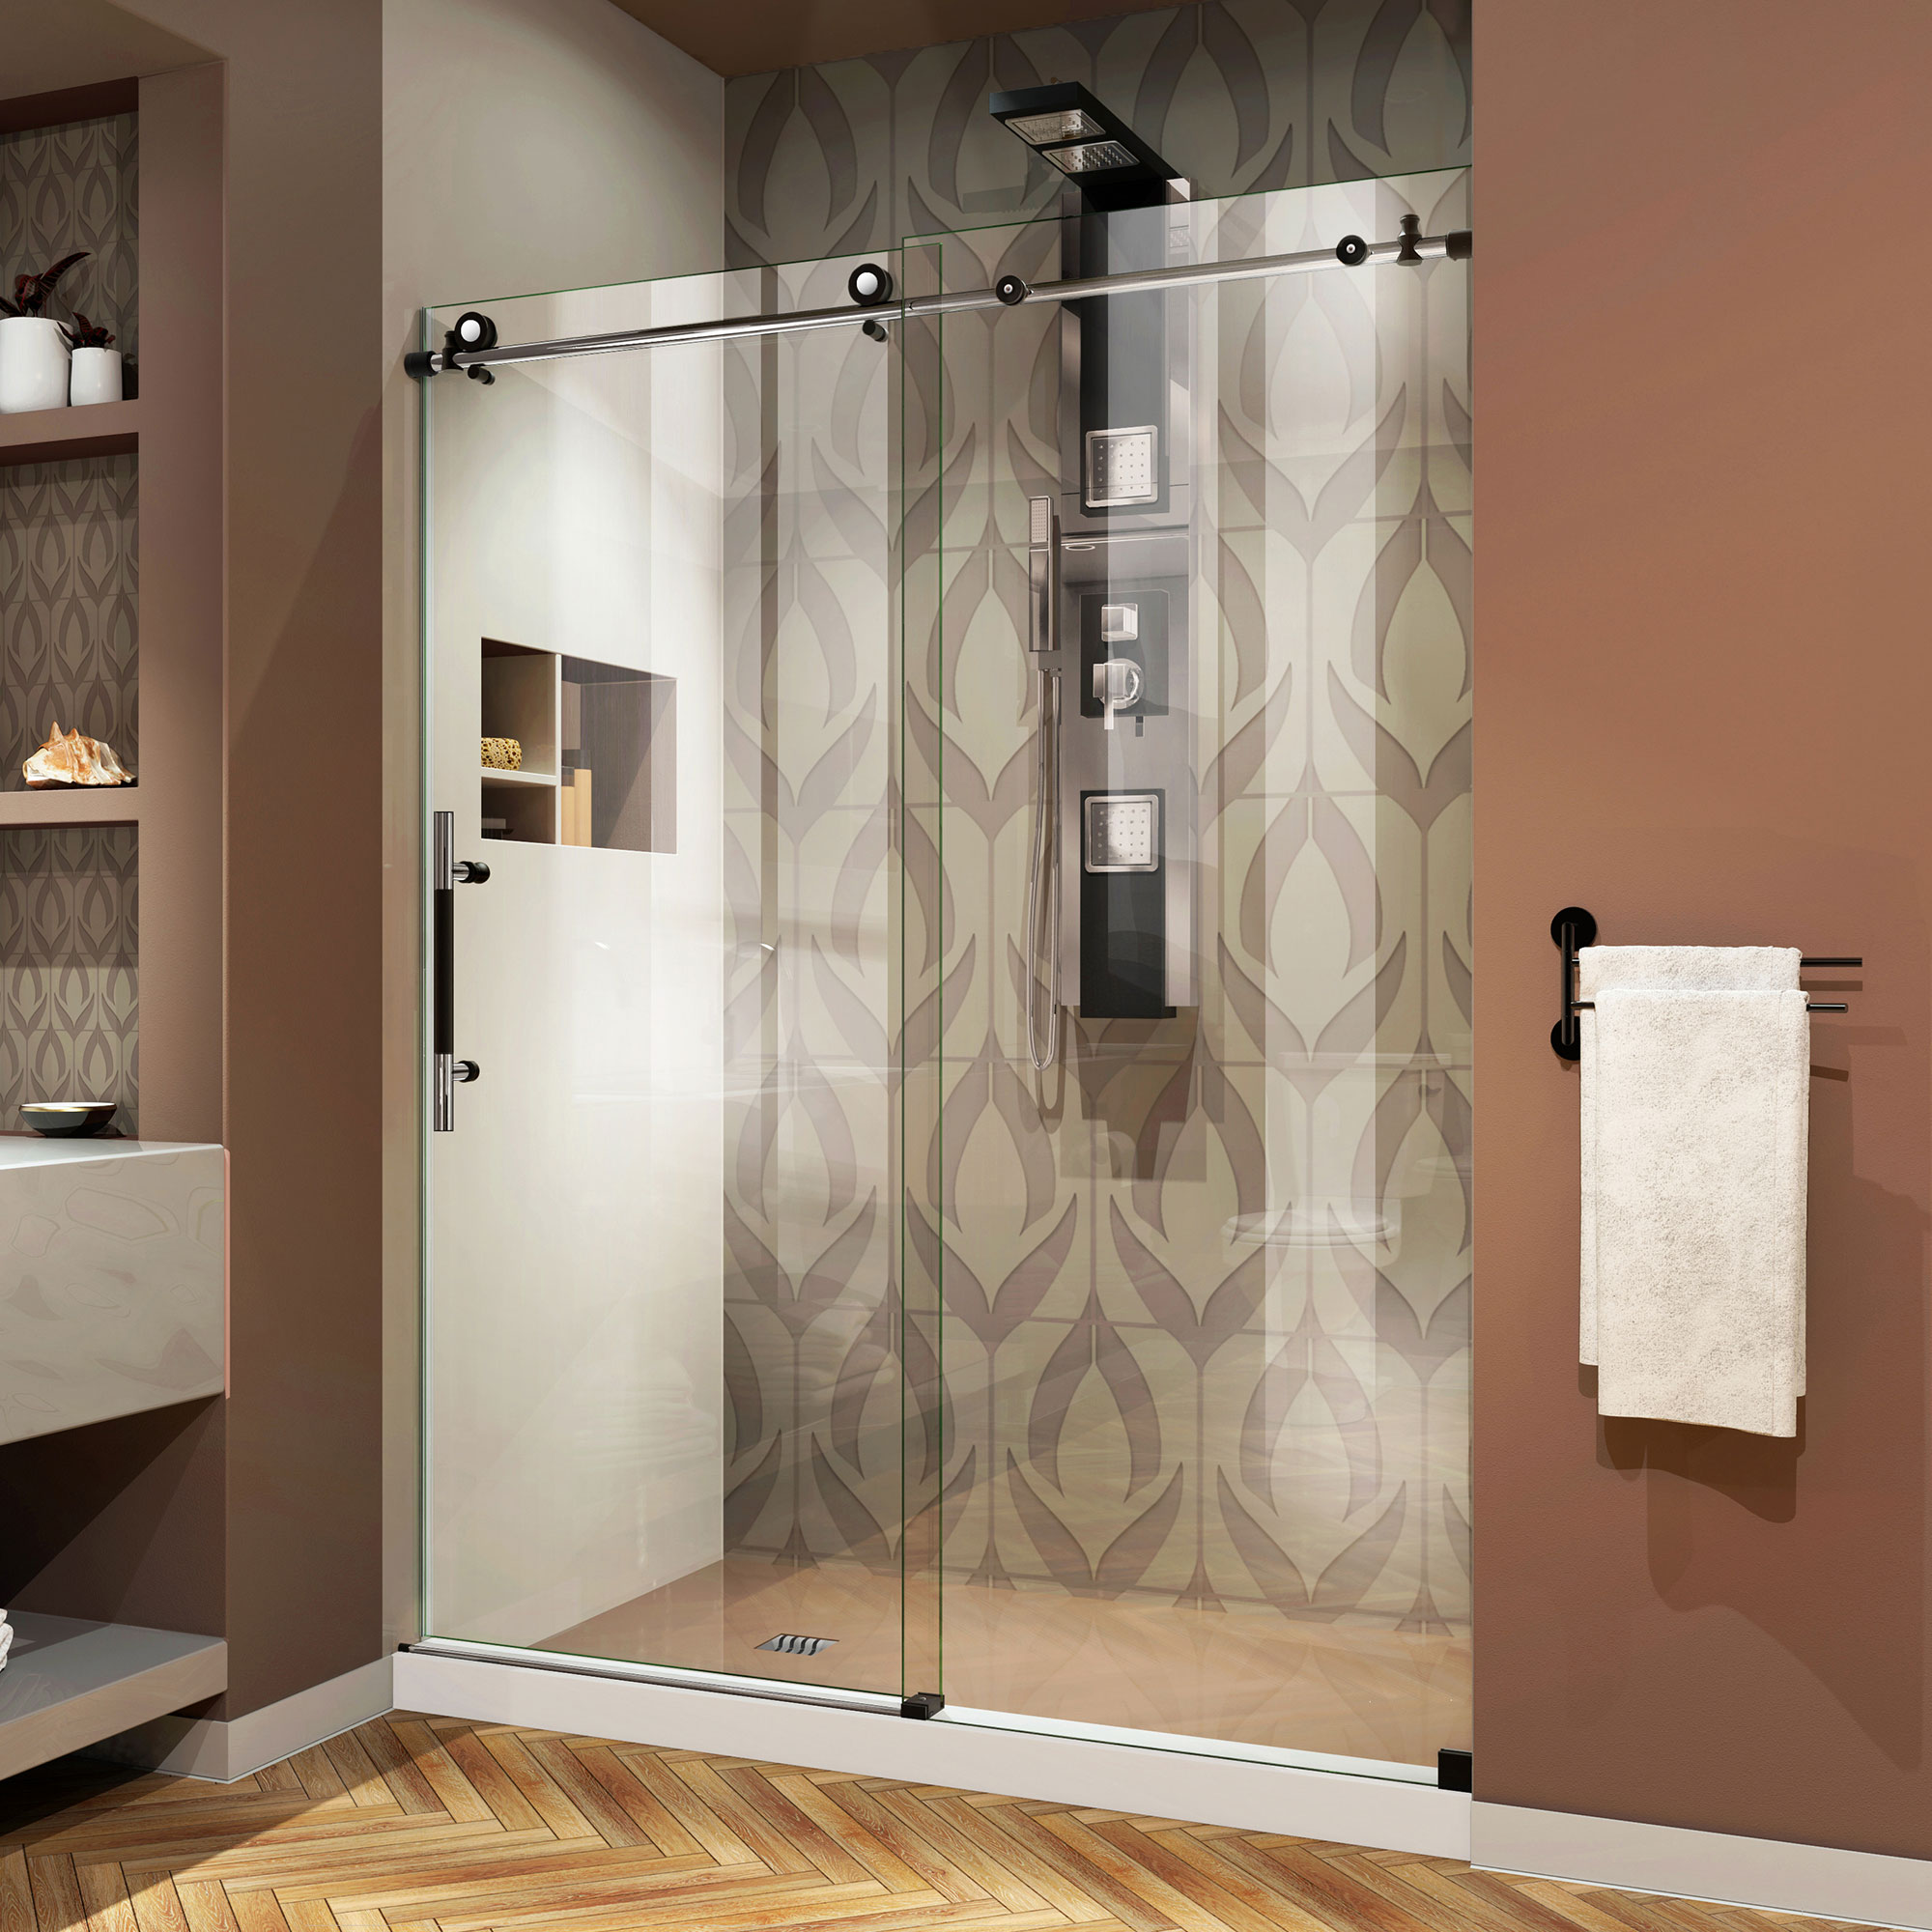 DreamLine Enigma-X 34 1/2 in. D x 72 3/8 in. W x 76 in. H Fully Frameless Sliding Shower Enclosure in Polished Stainless Steel